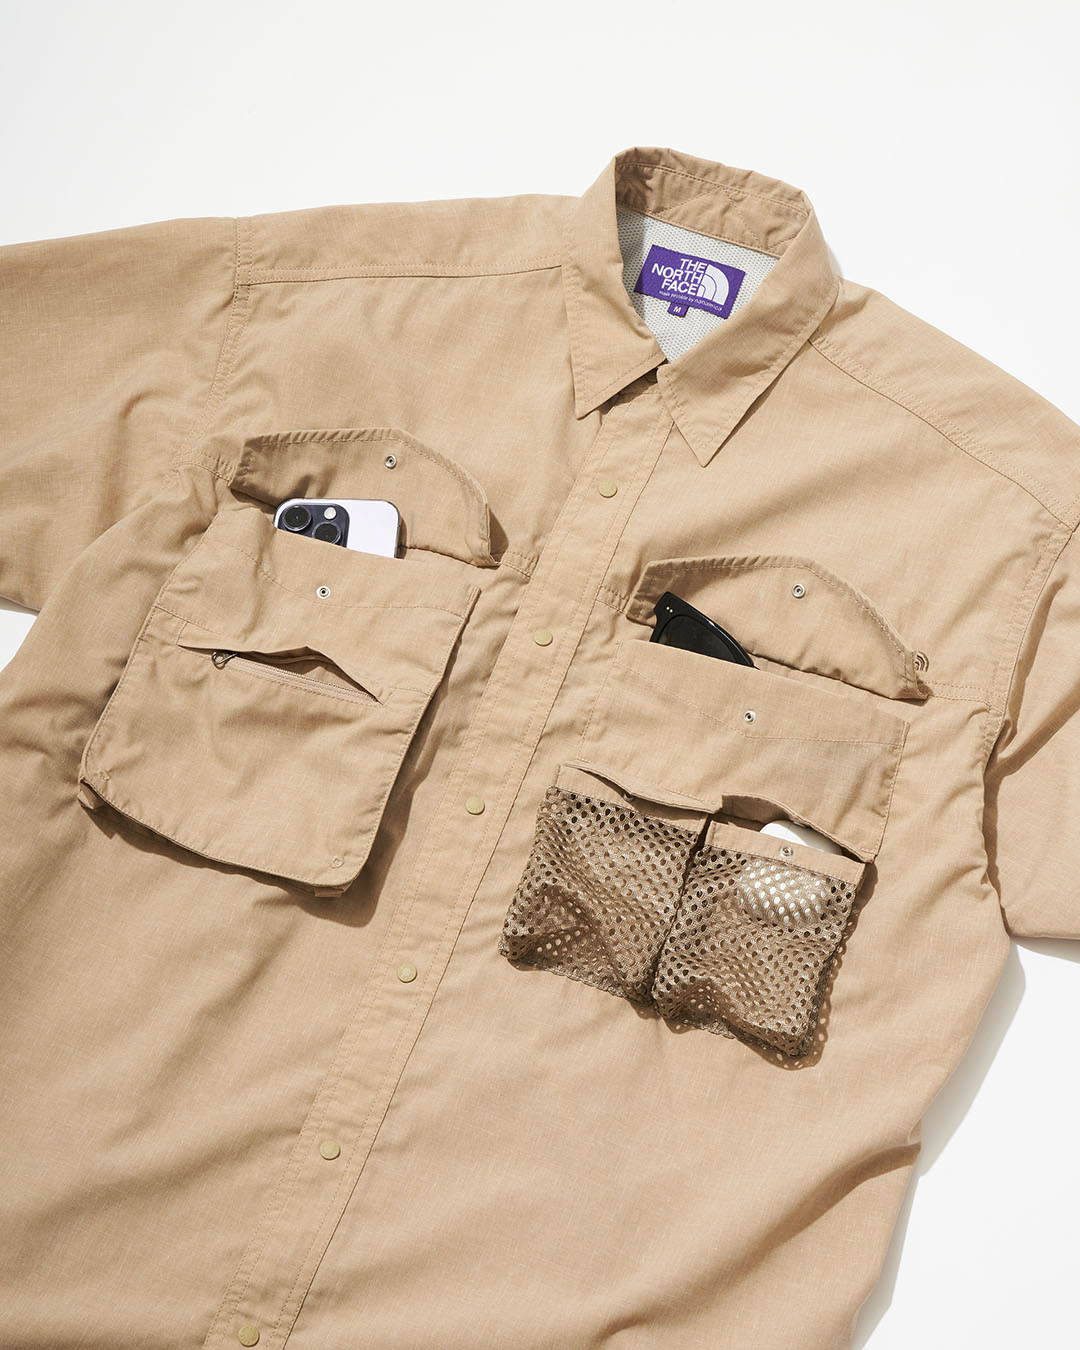 nanamica / THE NORTH FACE PURPLE LABEL / Featured Product vol. 51